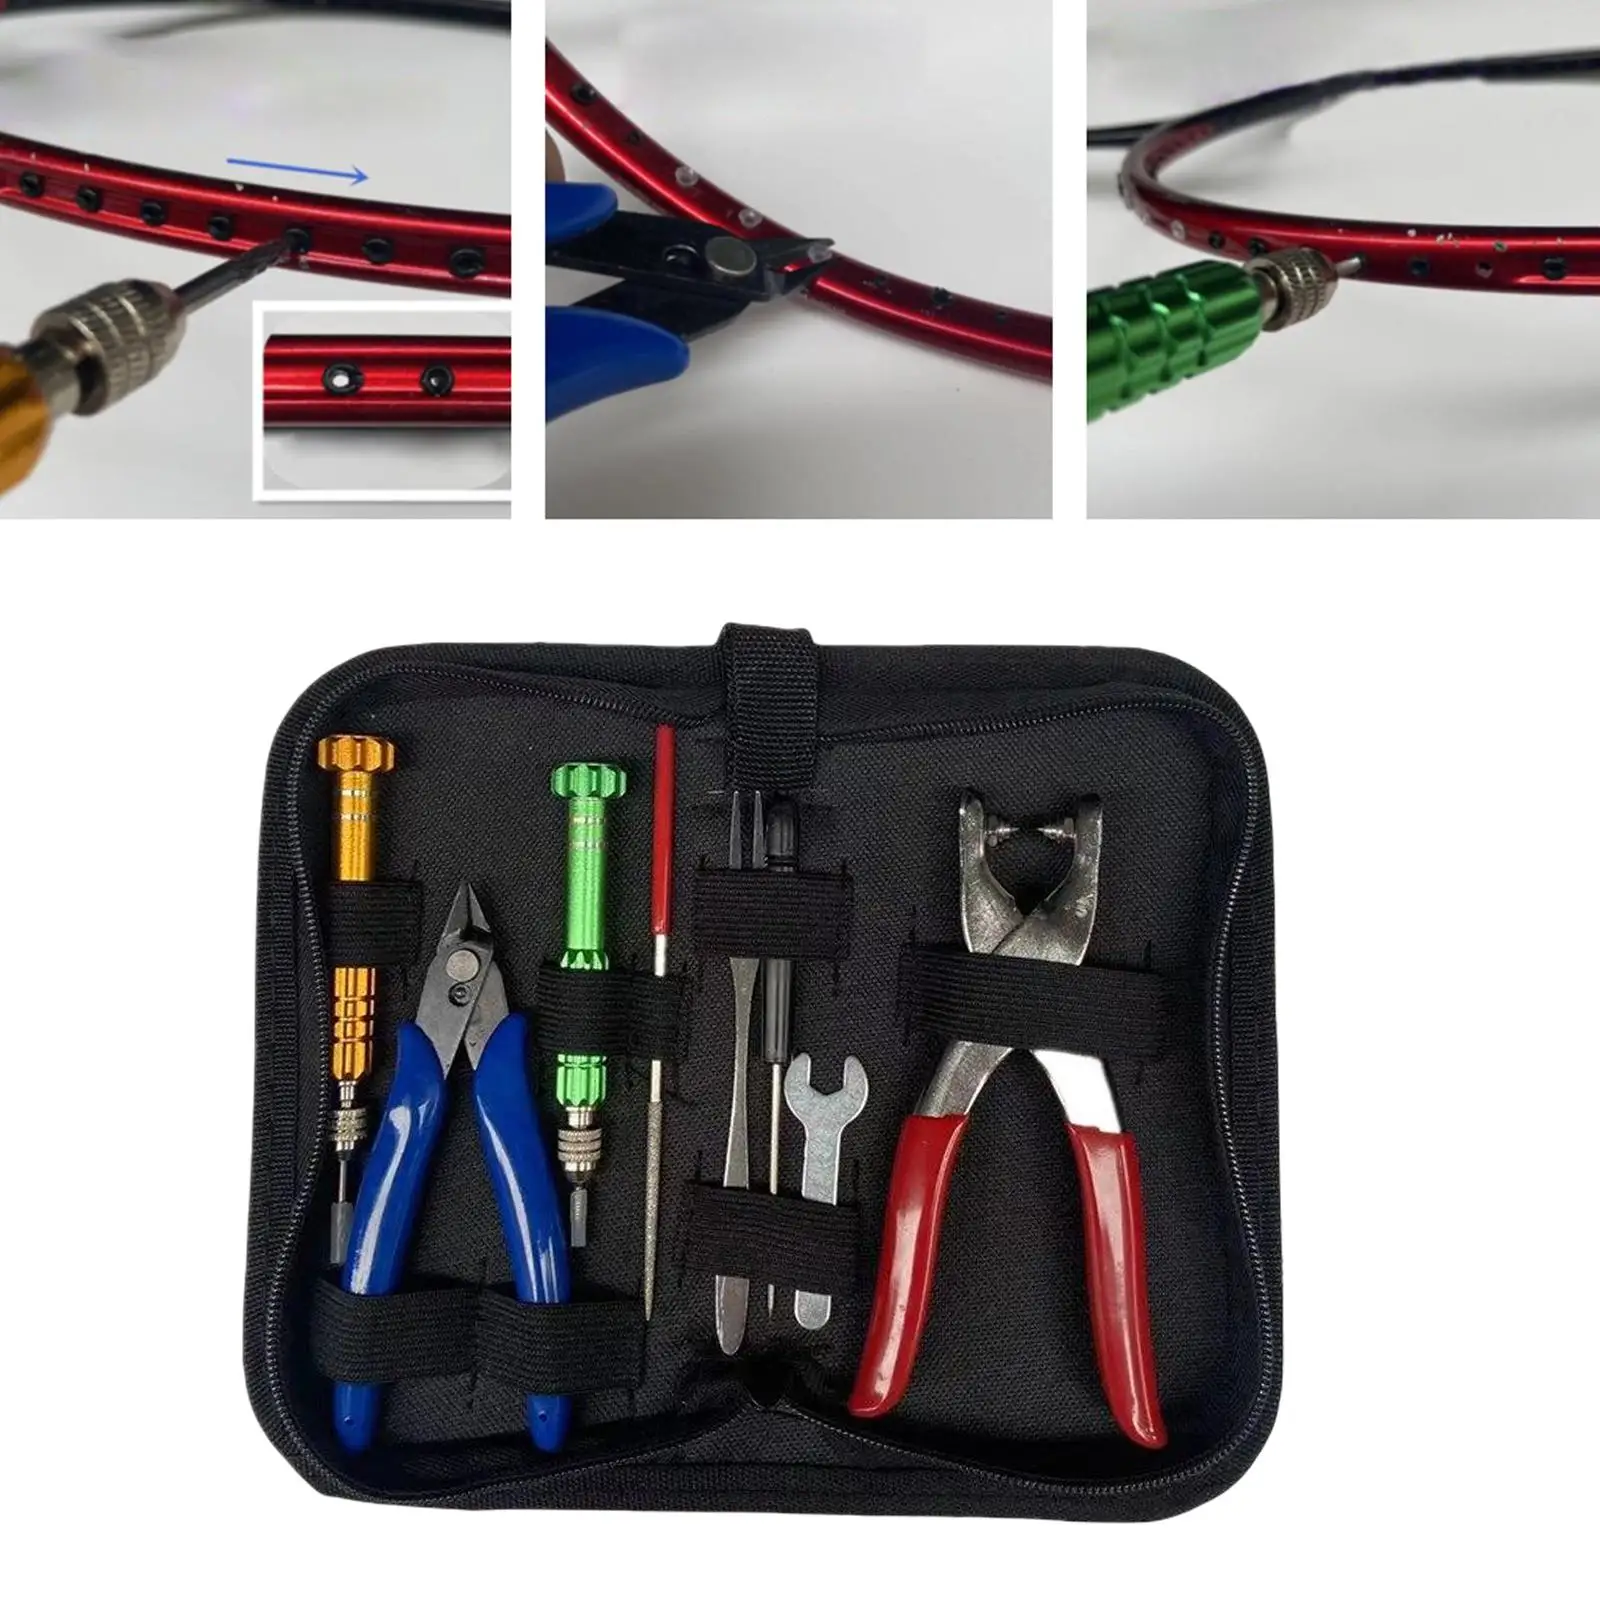 Professional Starting Stringing Clamp Tool Kit for Tennis Racket Replacement